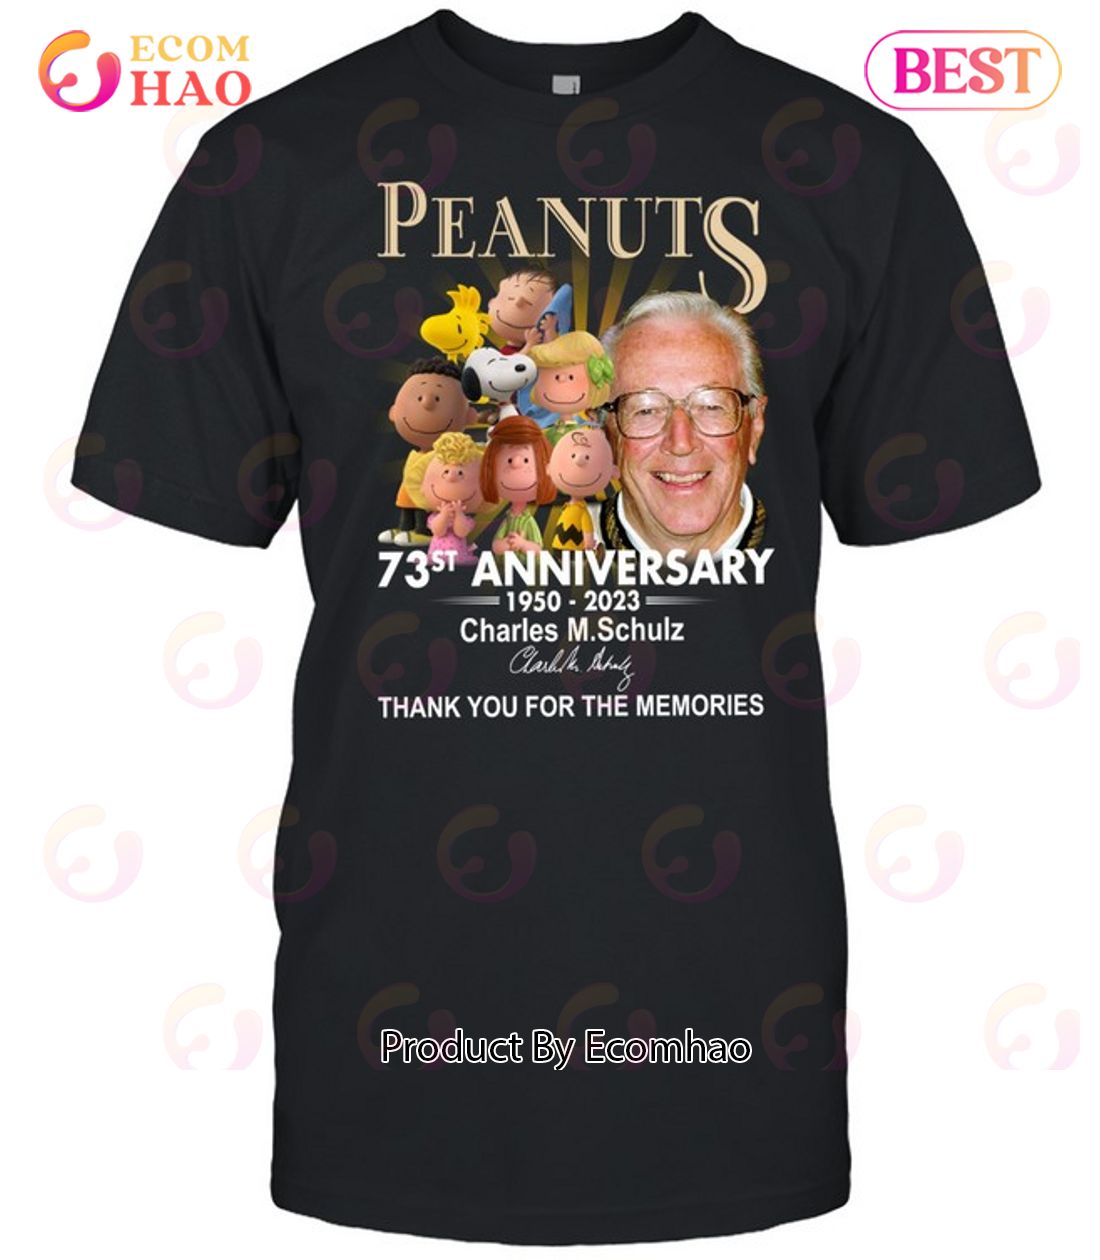 Peanuts 73st Anniversary 1950 – 2023 Charles M.Schulz Thank You For The Memories T-Shirt